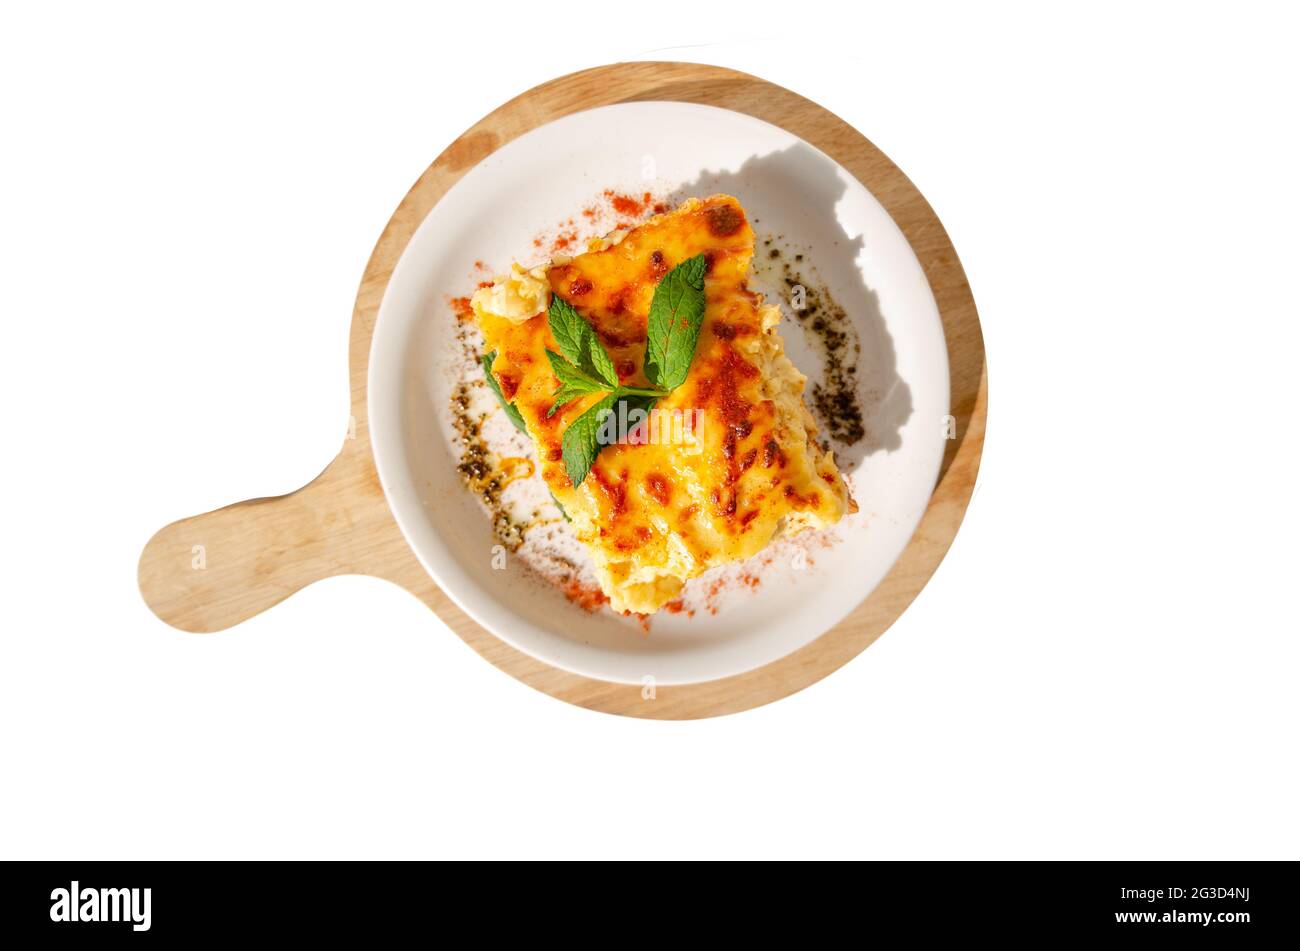 Top view of a plate of pasticcio on a wooden cutting board isolated in the white background Stock Photo